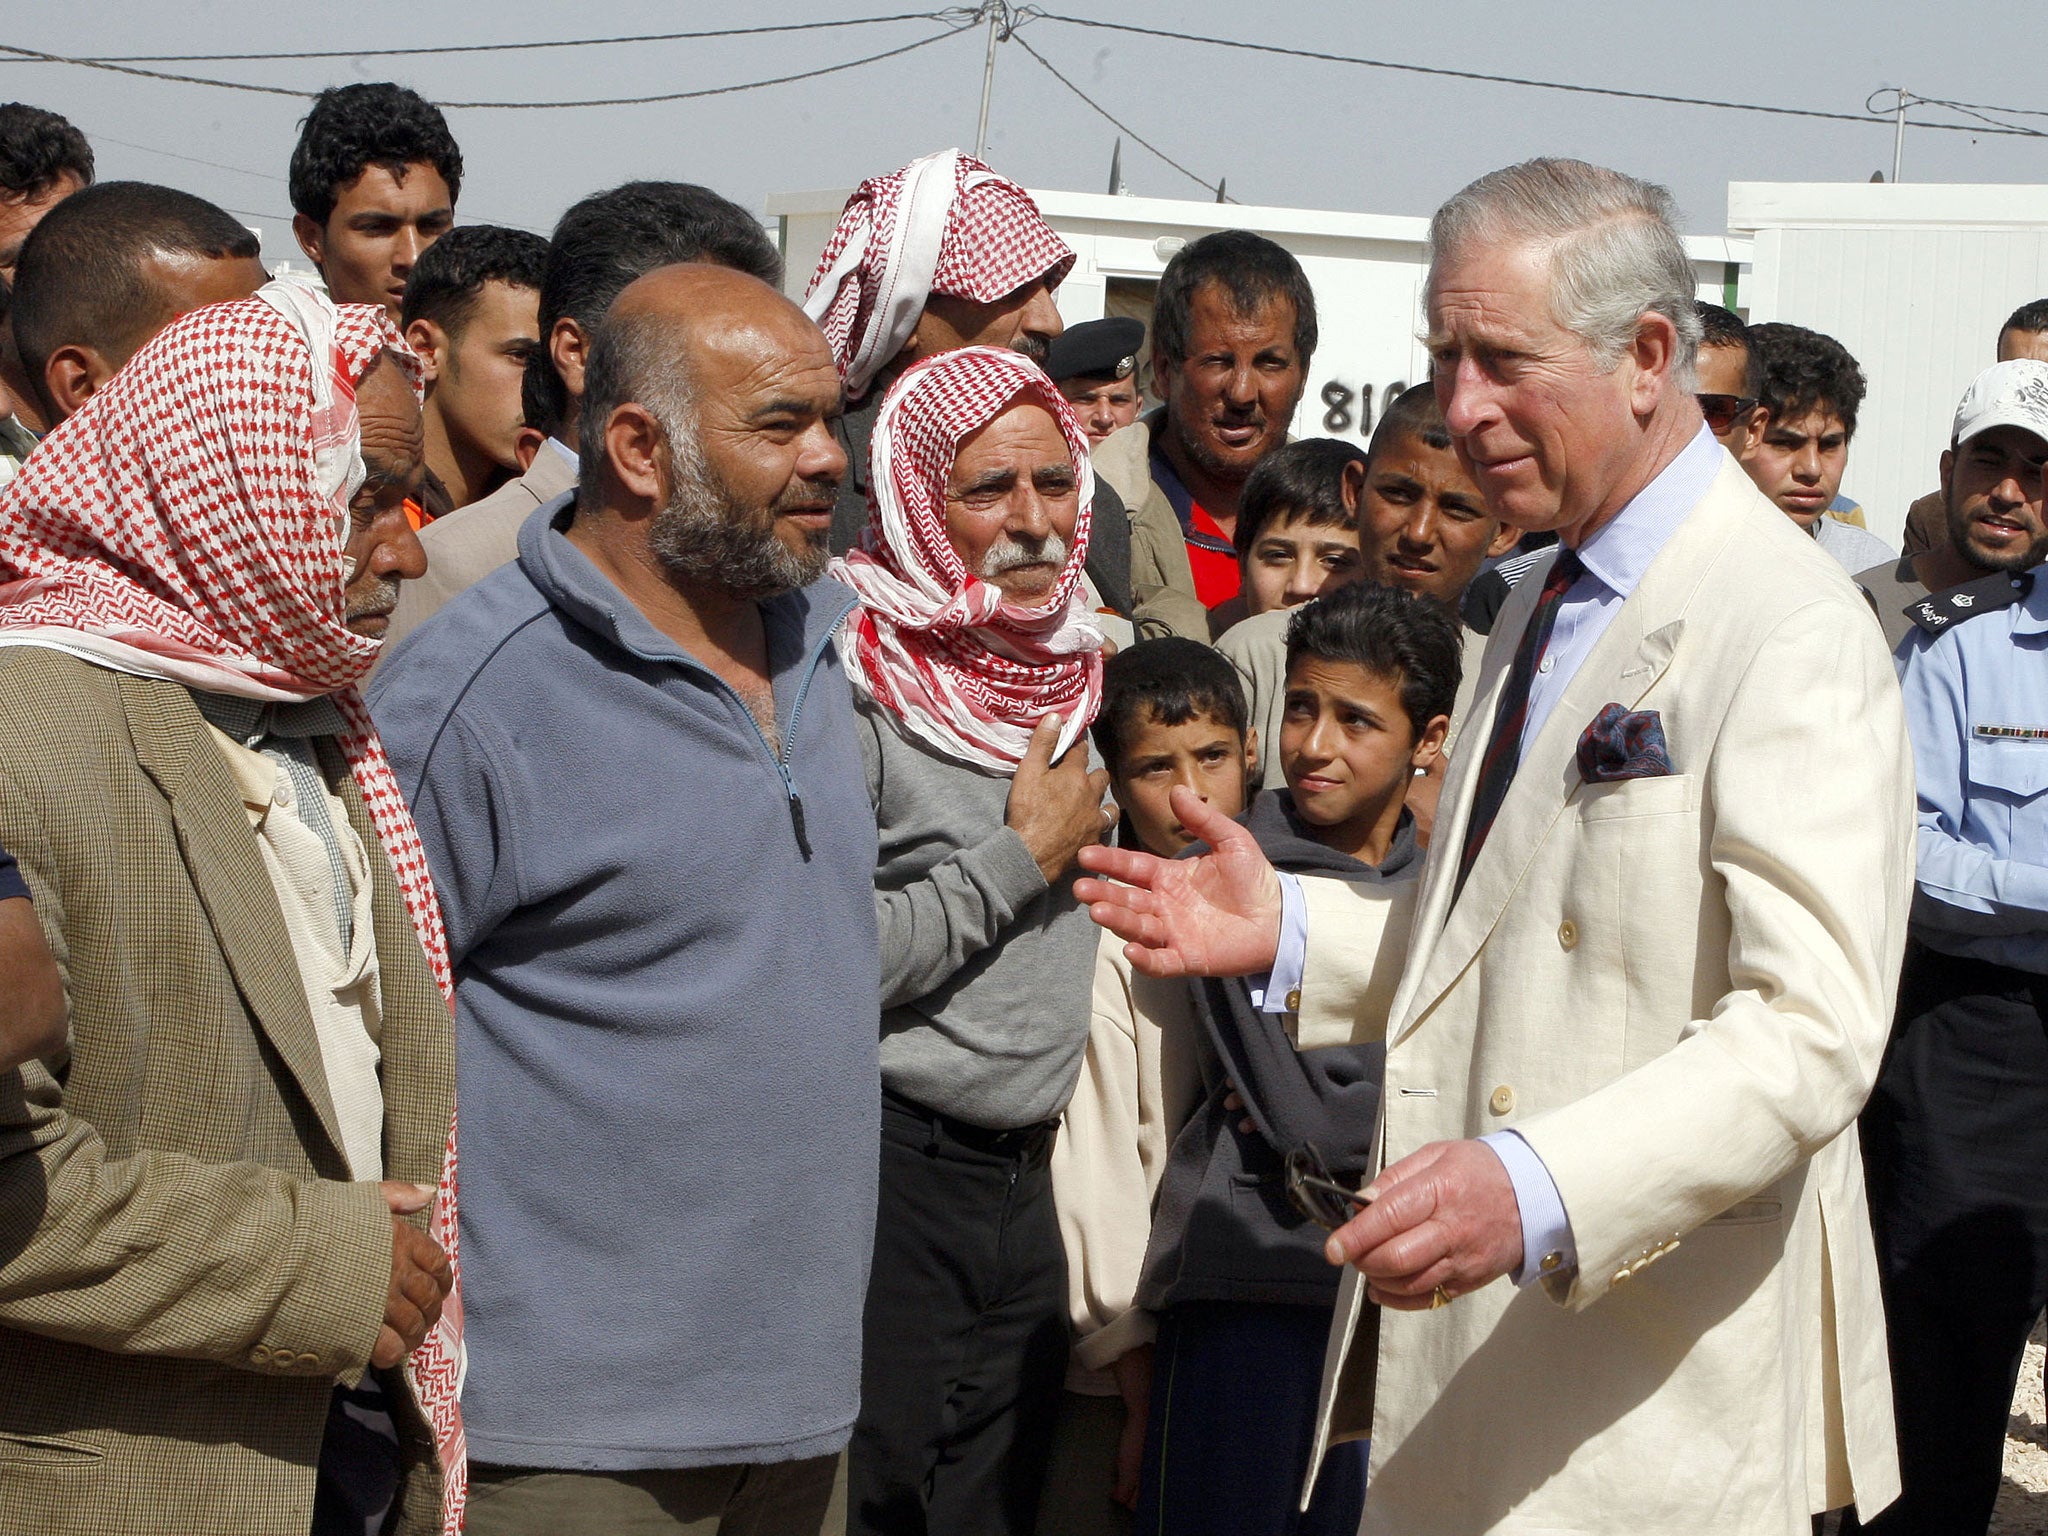 Prince Charles, Prince of Wales visits the King Abdullah Refugee Camp for Syrian refugees 2 kilometers from the Syrian border on the third day of a visit to the country on March 13, 2013 in Ramtha Jordan.